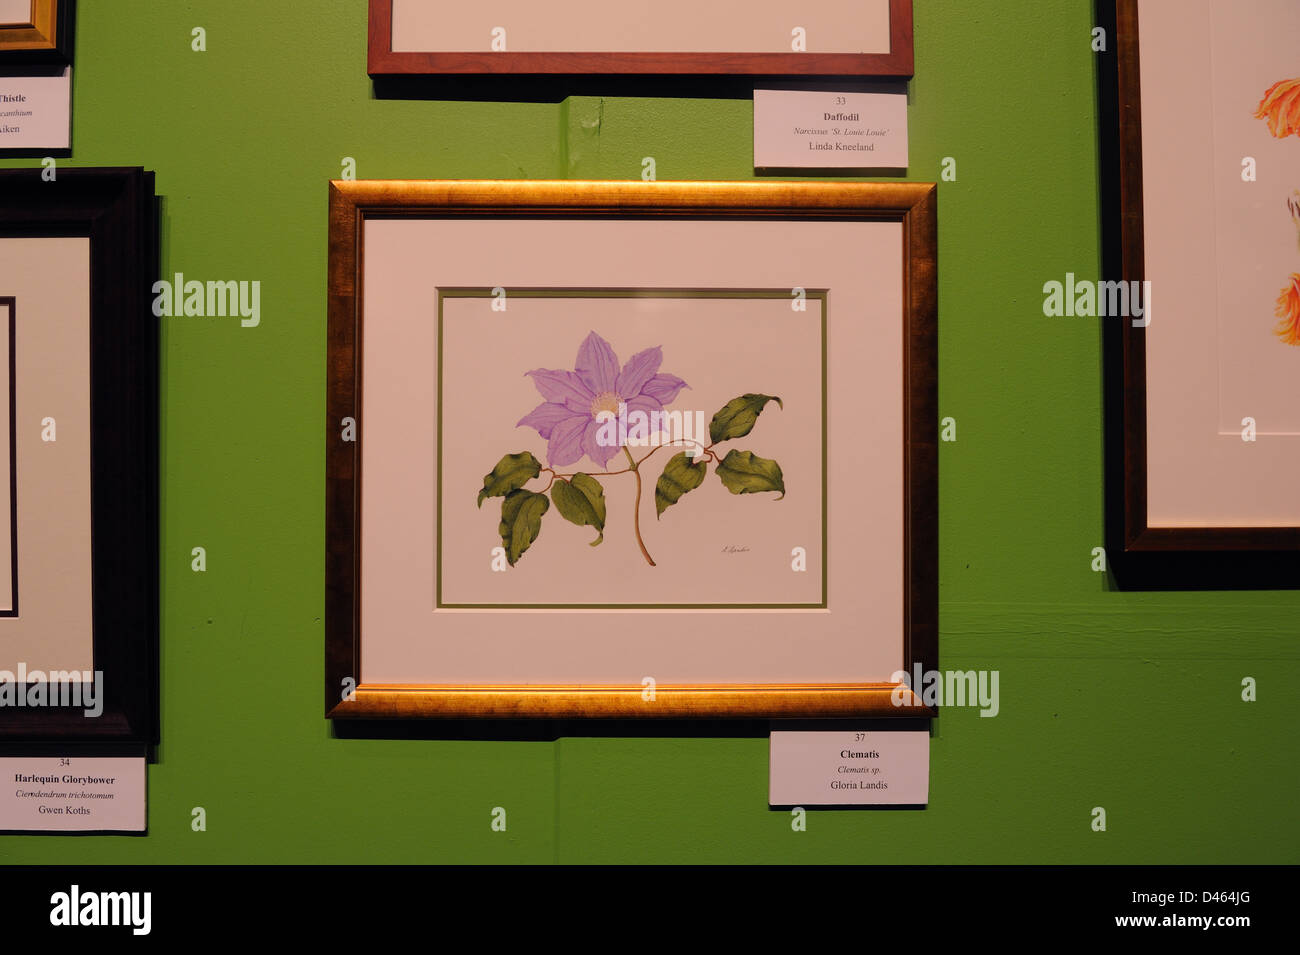 Botanical illustrations at the Philadelphia Flower Show, the largest indoor flower show in the world. Stock Photo